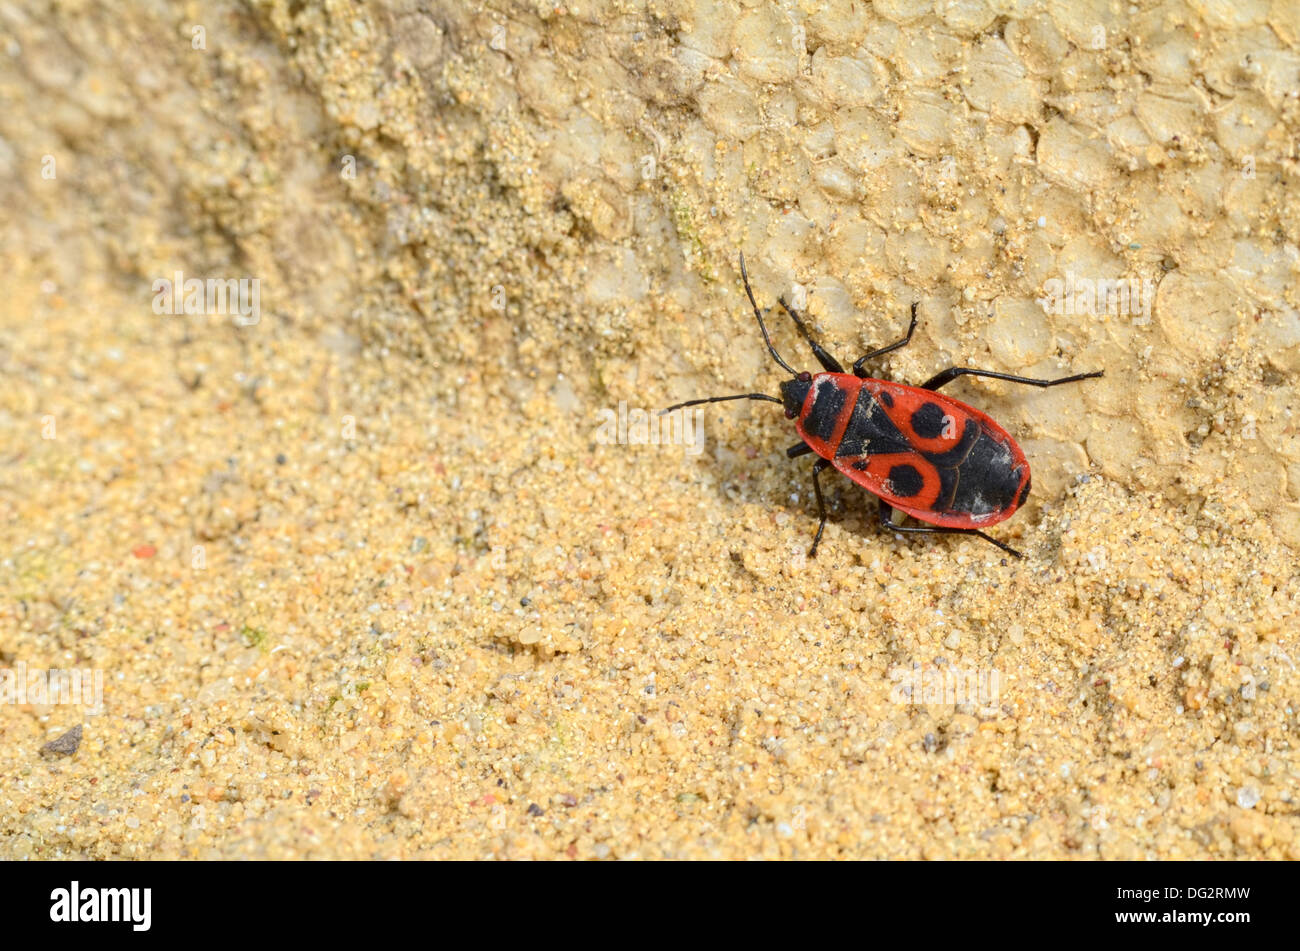 A Single Firebug Crawling in the Pure Sand Left Stock Photo